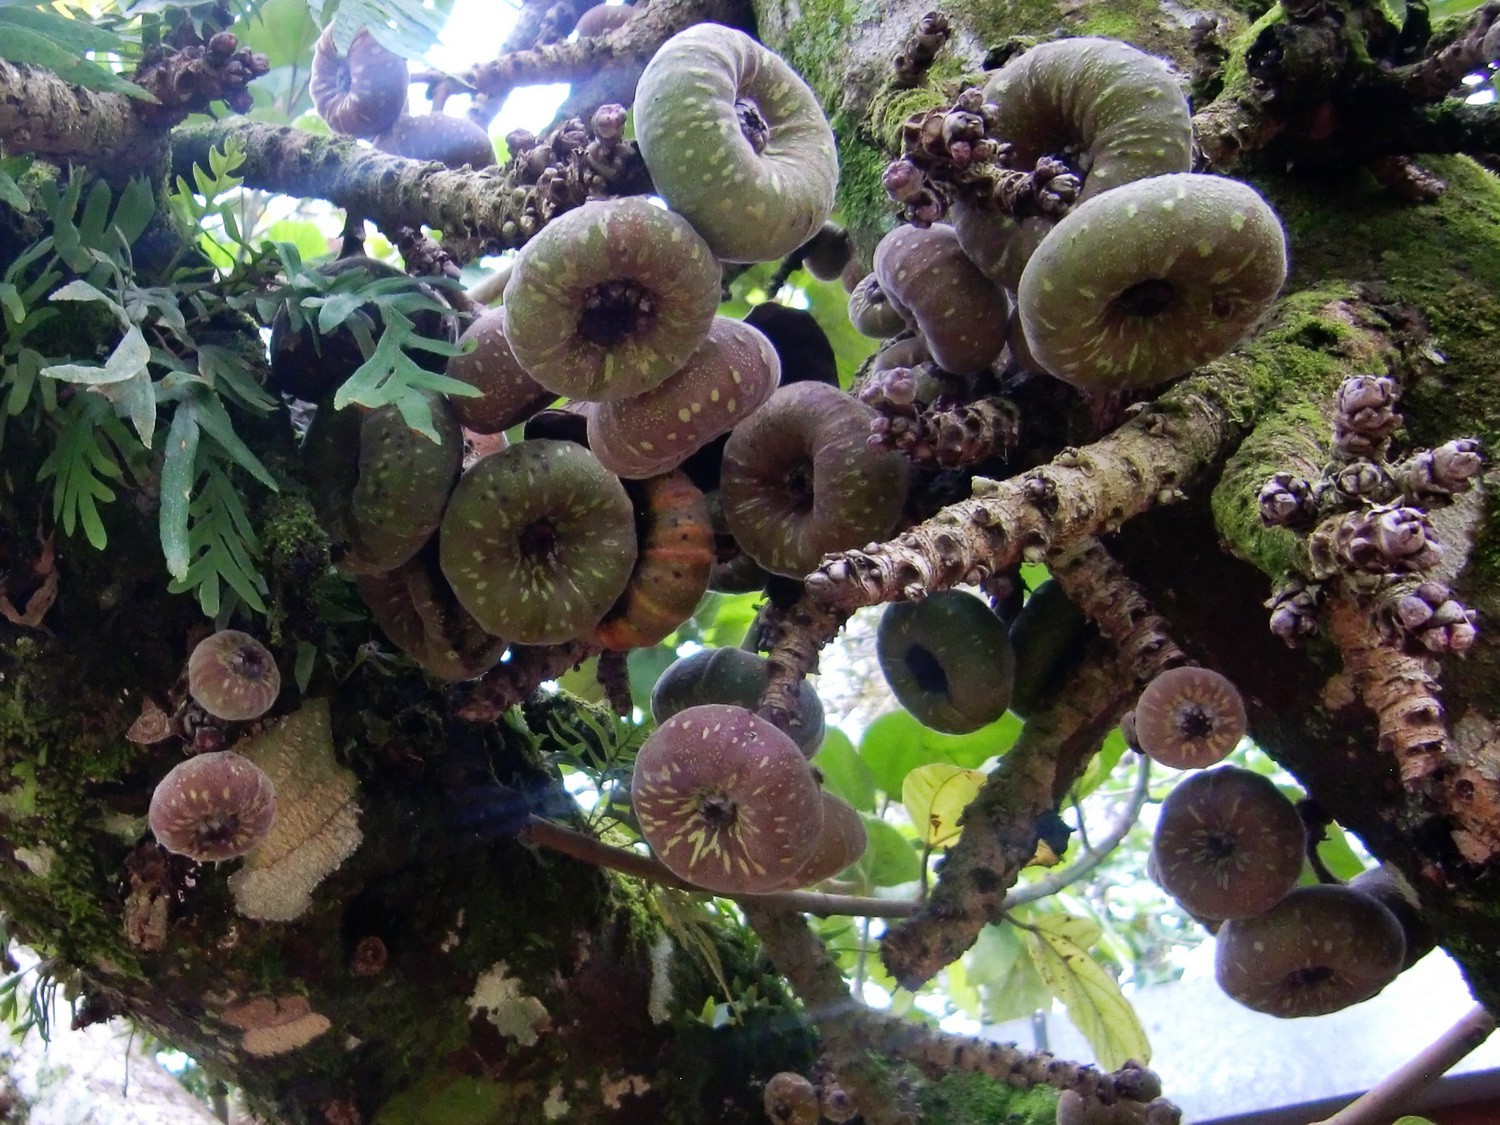 Unkown fruits